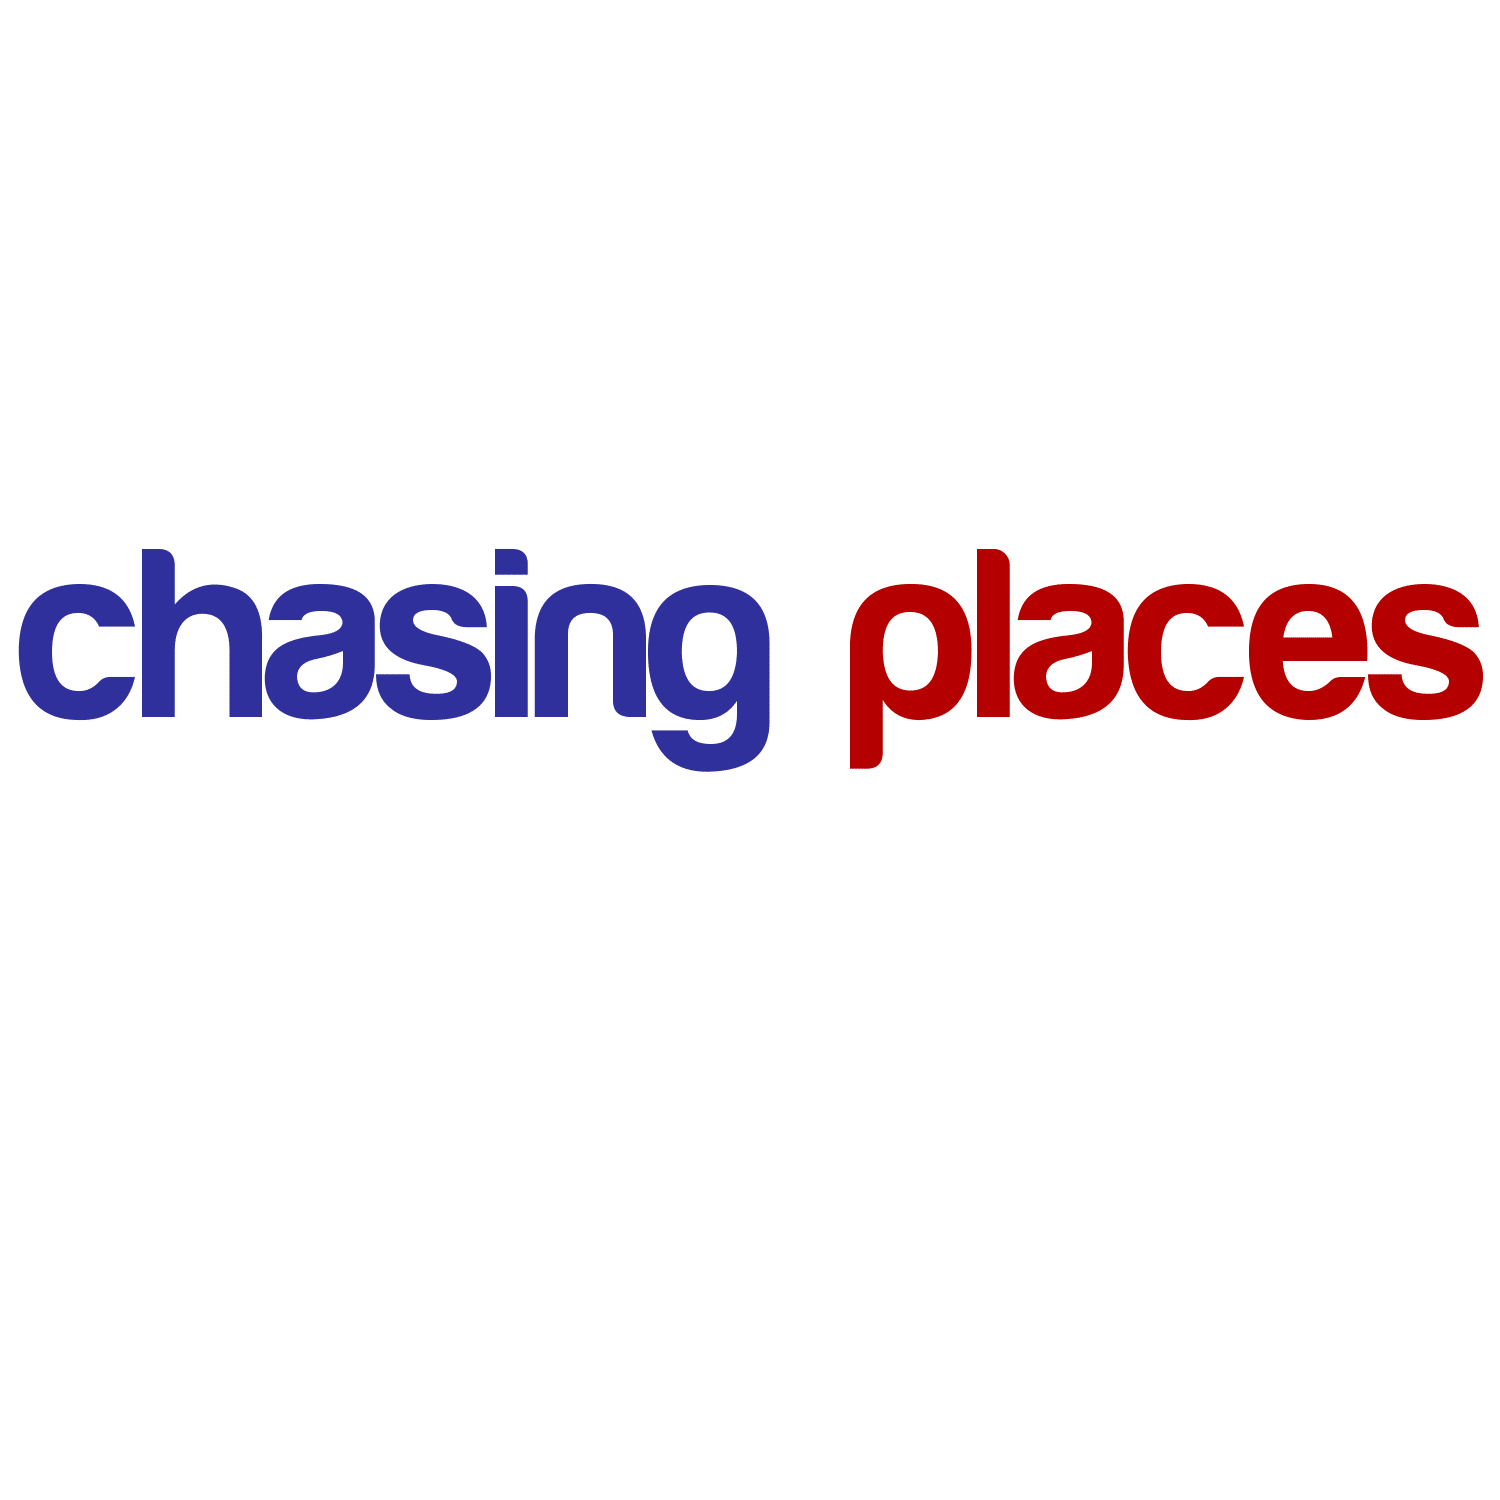 Chasing Logo - Chasing PLaces Logo 1500x1500. Chasing Places Travel Guide